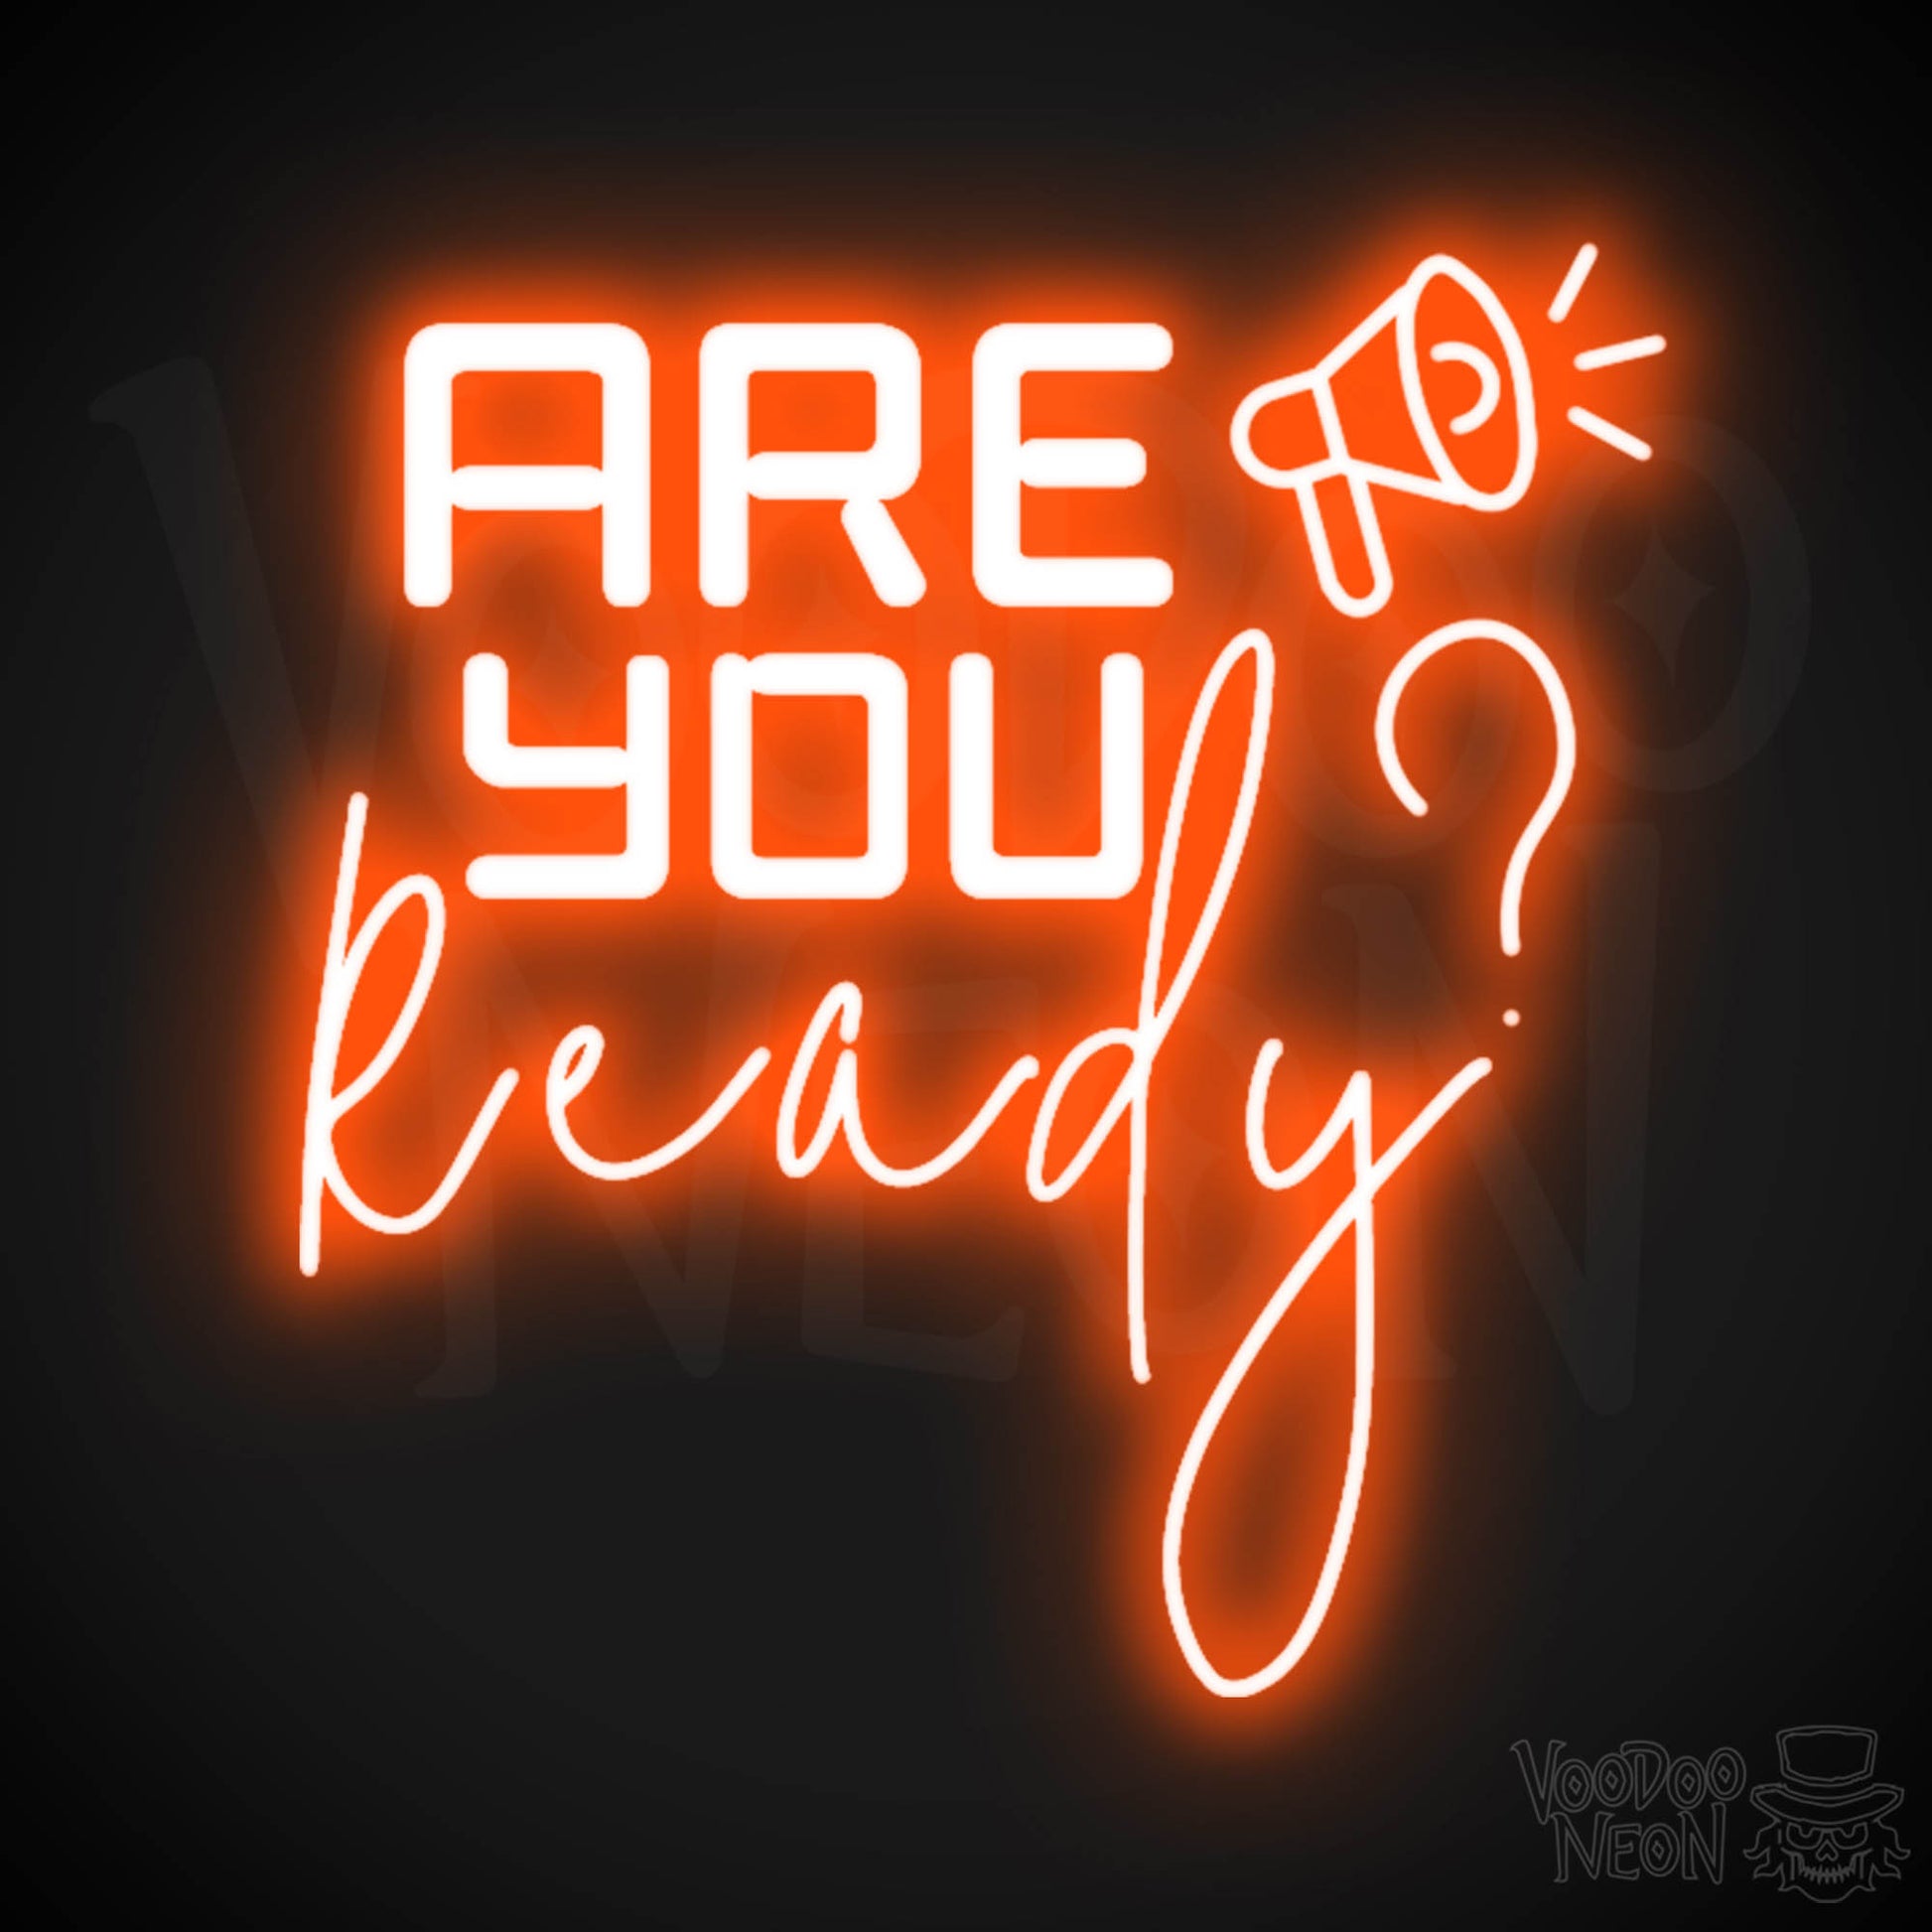 Are You Ready Neon Sign - Neon Are You Ready Sign - LED Wall Art - Color Orange